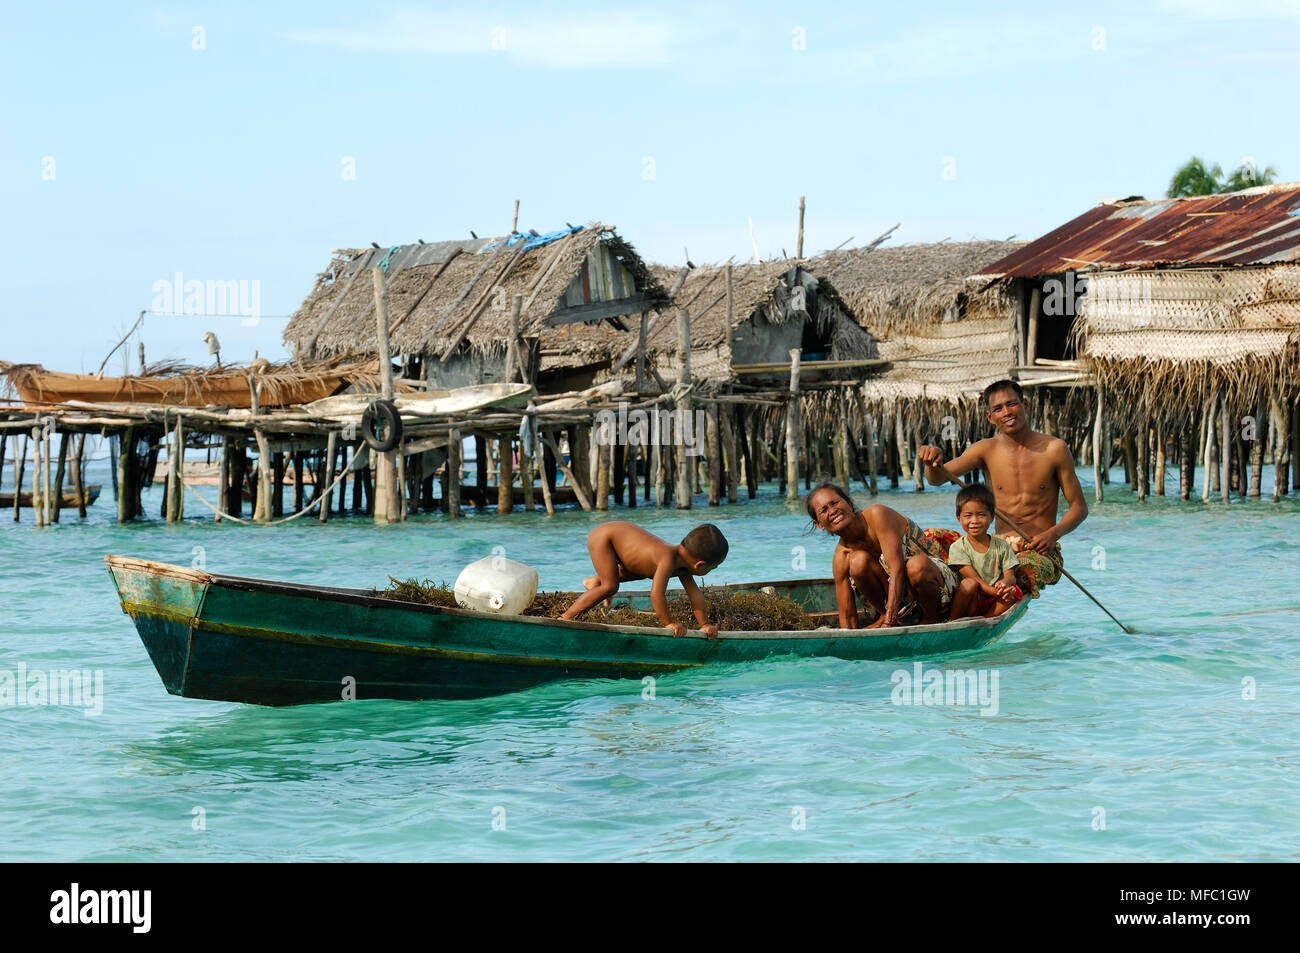 SEA BAJAU OF SEMPORNA Originally mostly from the Philippines, now settled in Semporna.  Sabah, Borneo, Malaysia. Stock Photo